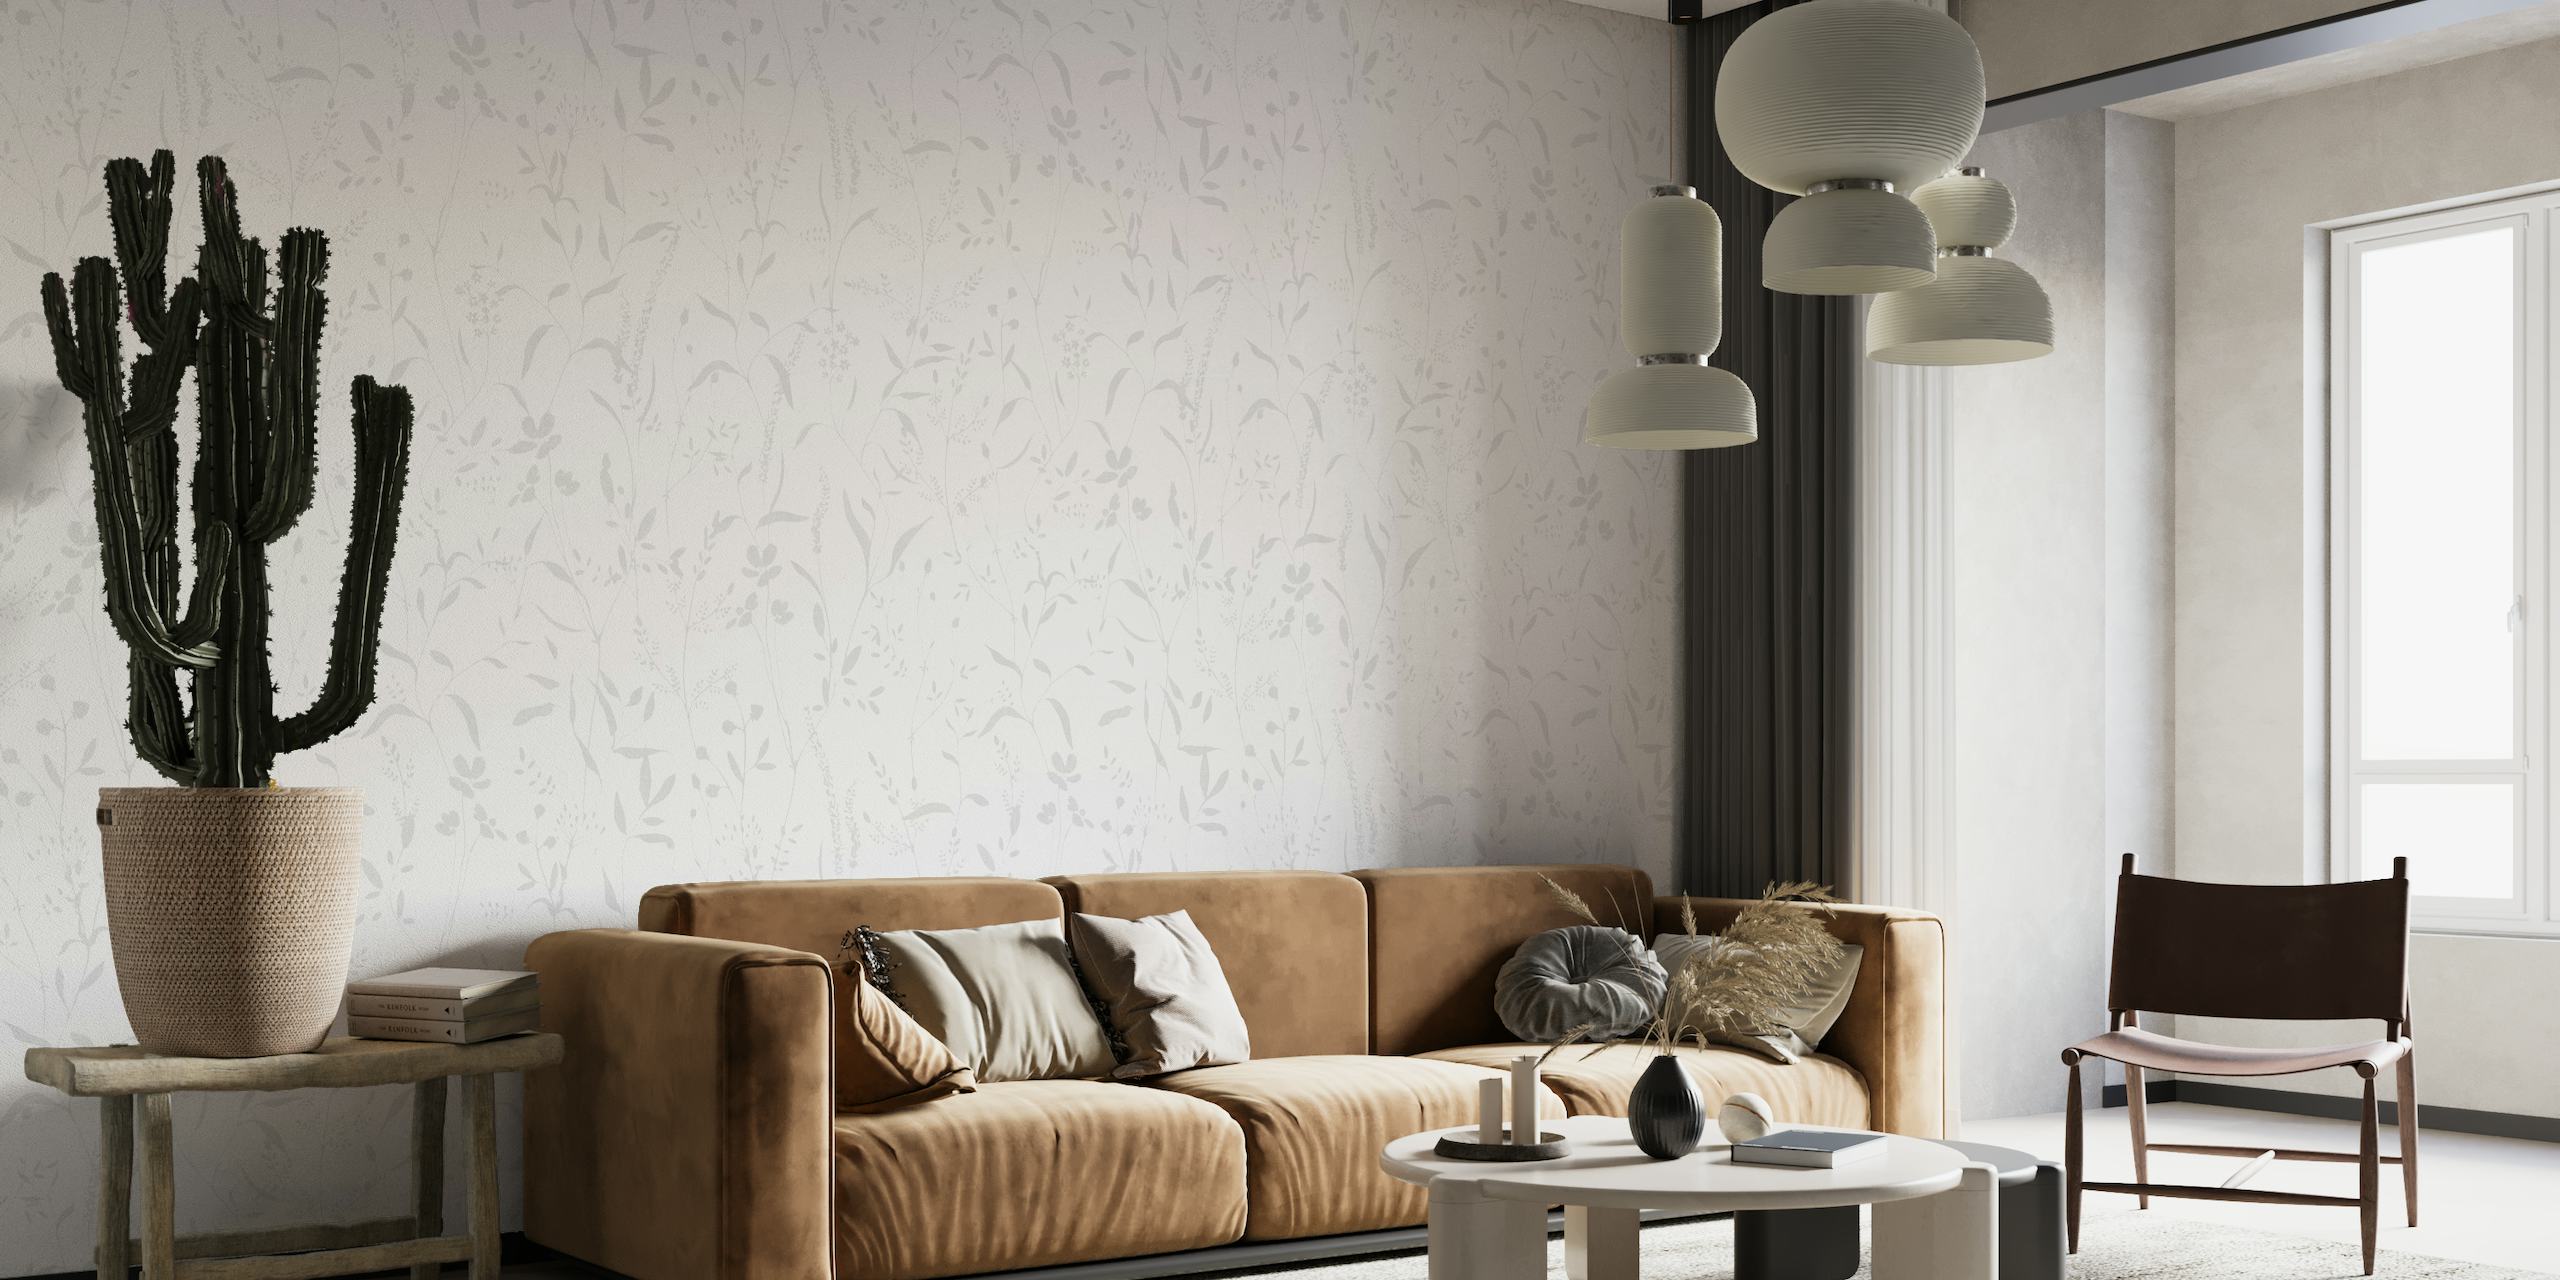 Light gray botanical patterns on a white background wall mural